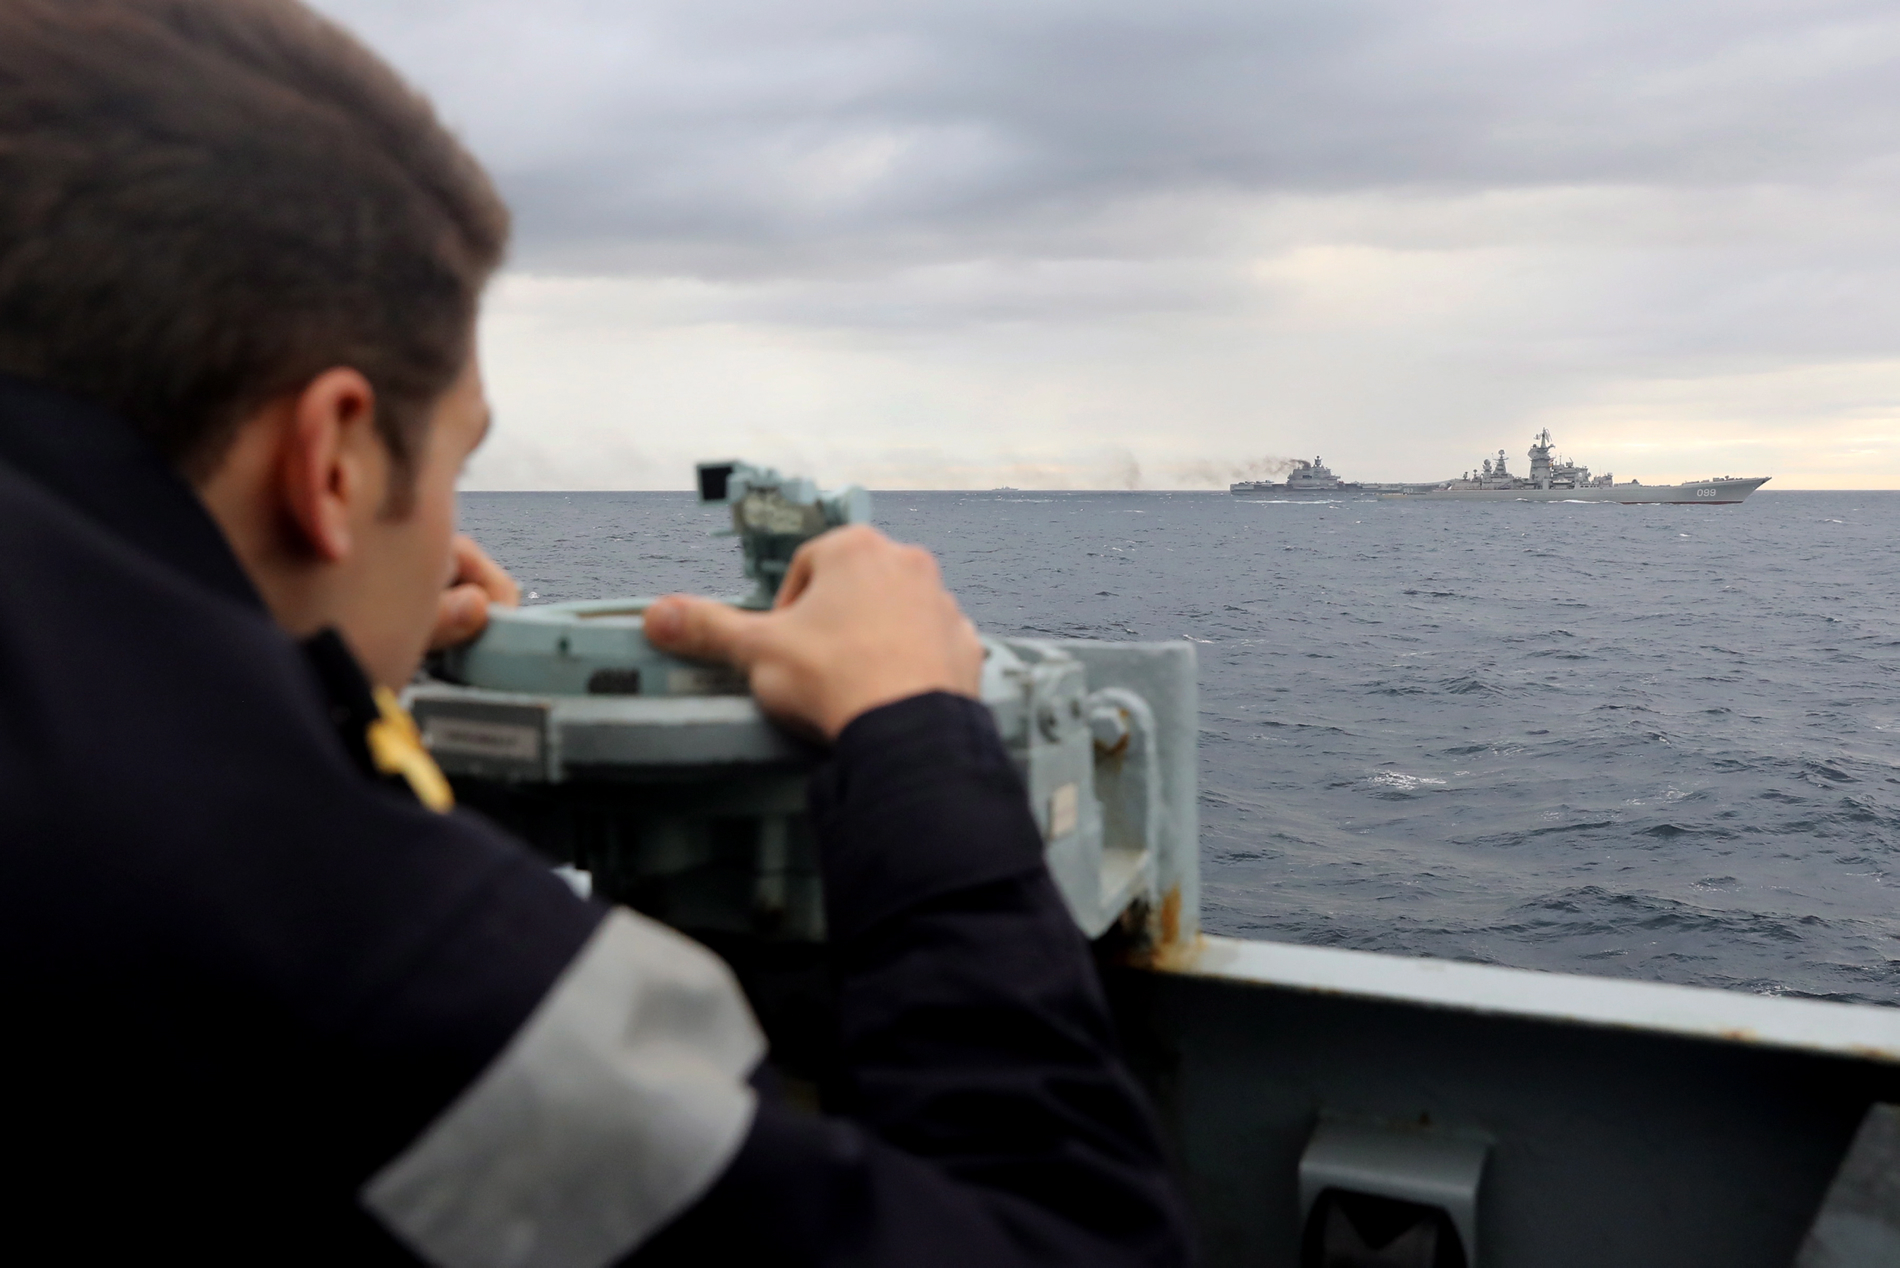 Royal Navy lookout, observing the Russian task group during transit.